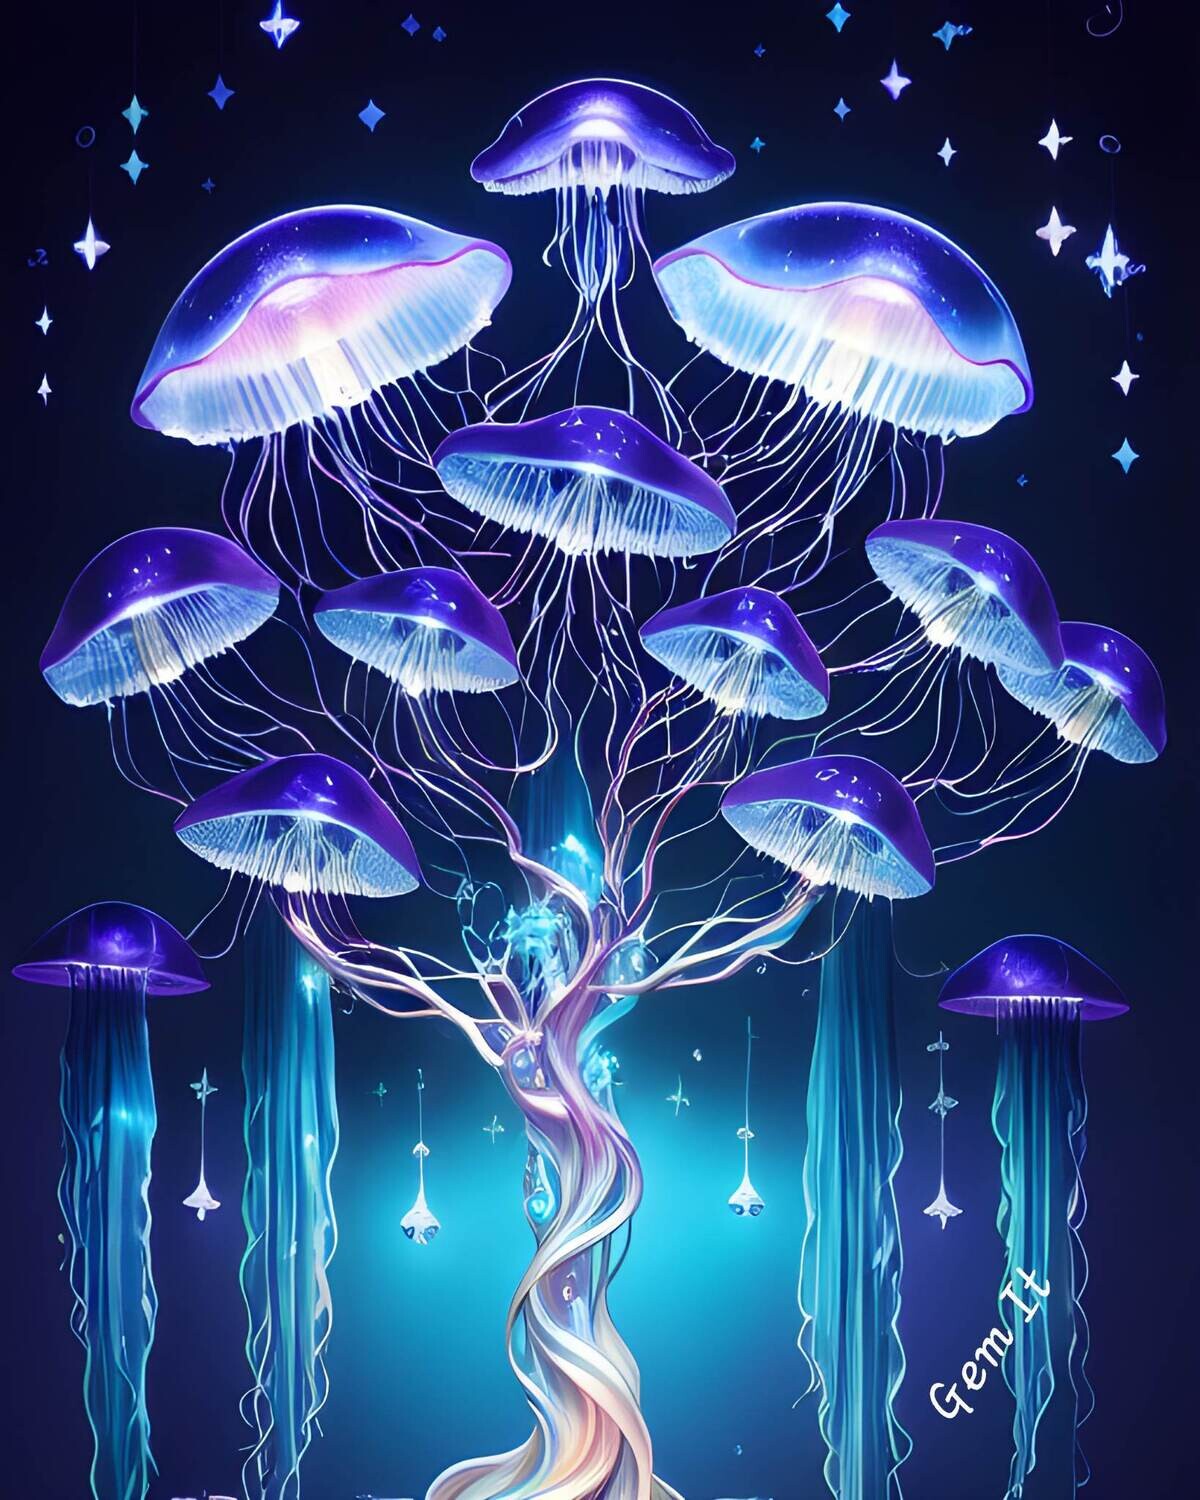 Jellyfish Tree 174 - Specially ordered for you. Delivery is approximately 4 - 6 weeks.